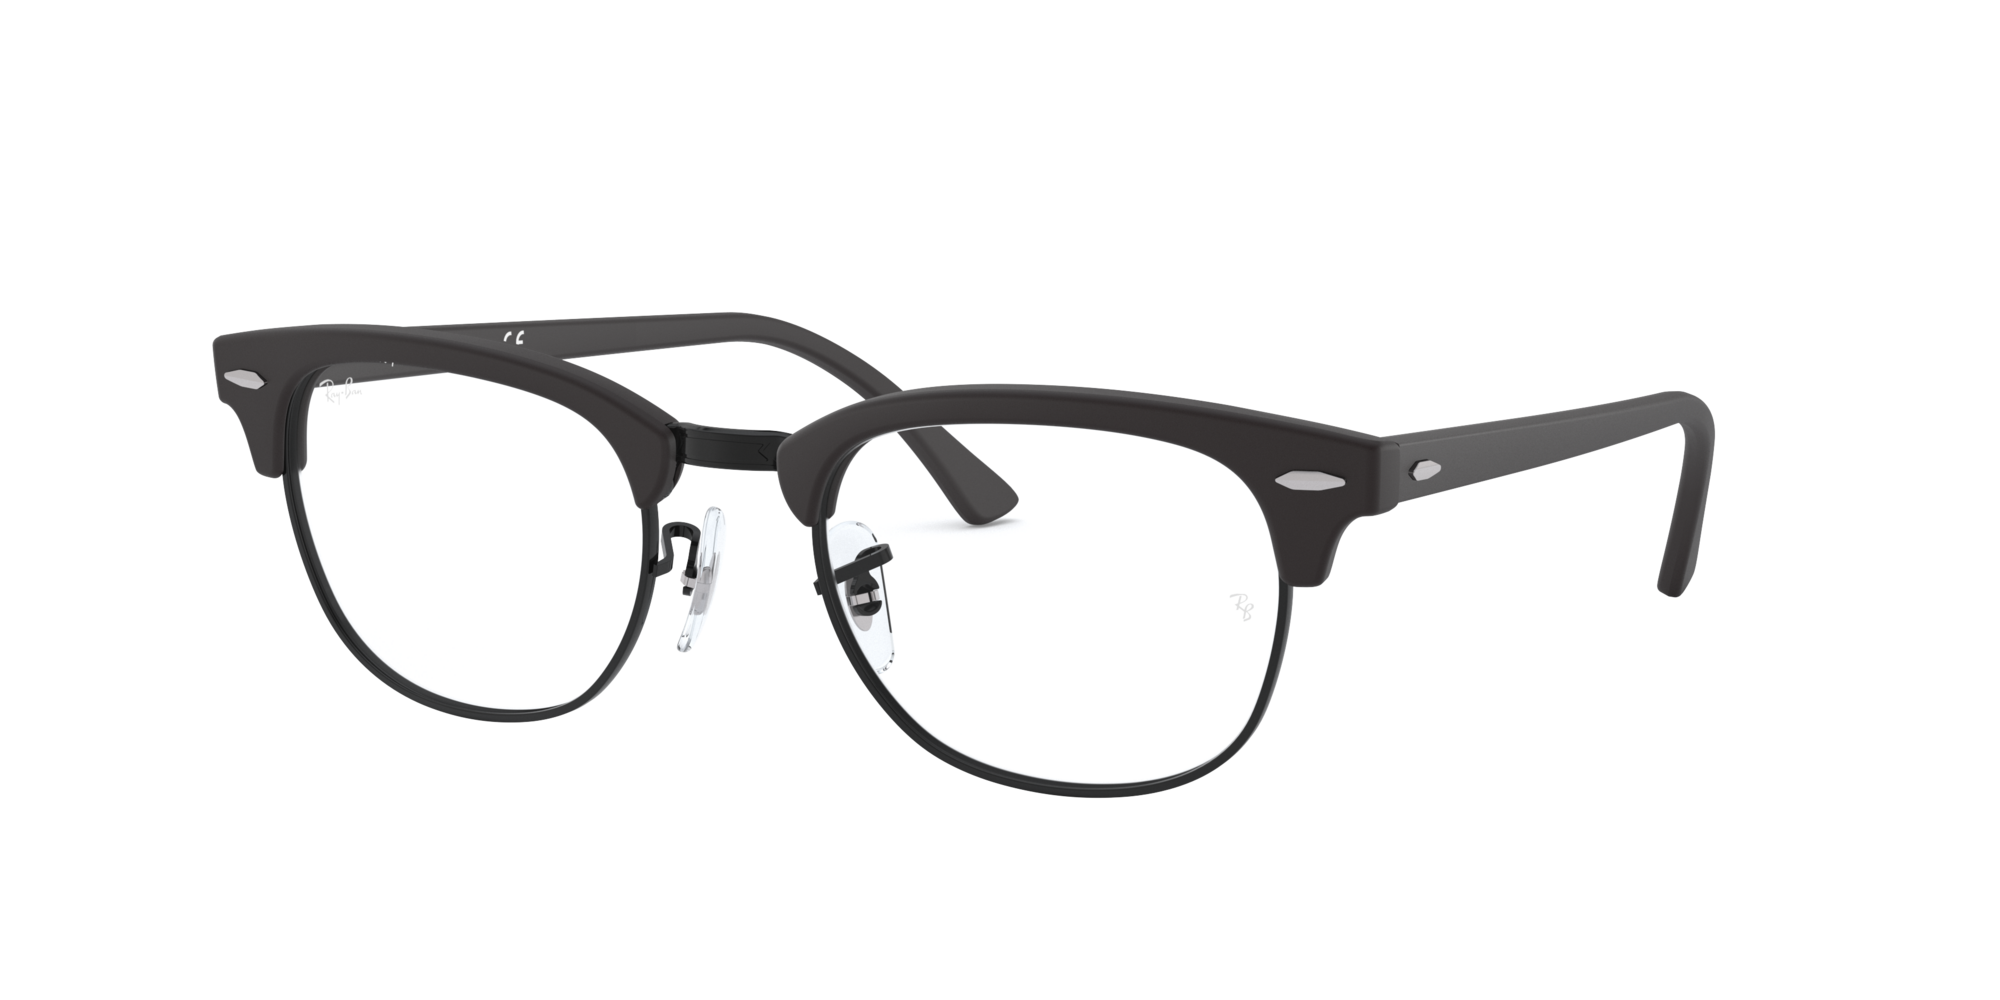 lenscrafters ray ban clubmaster